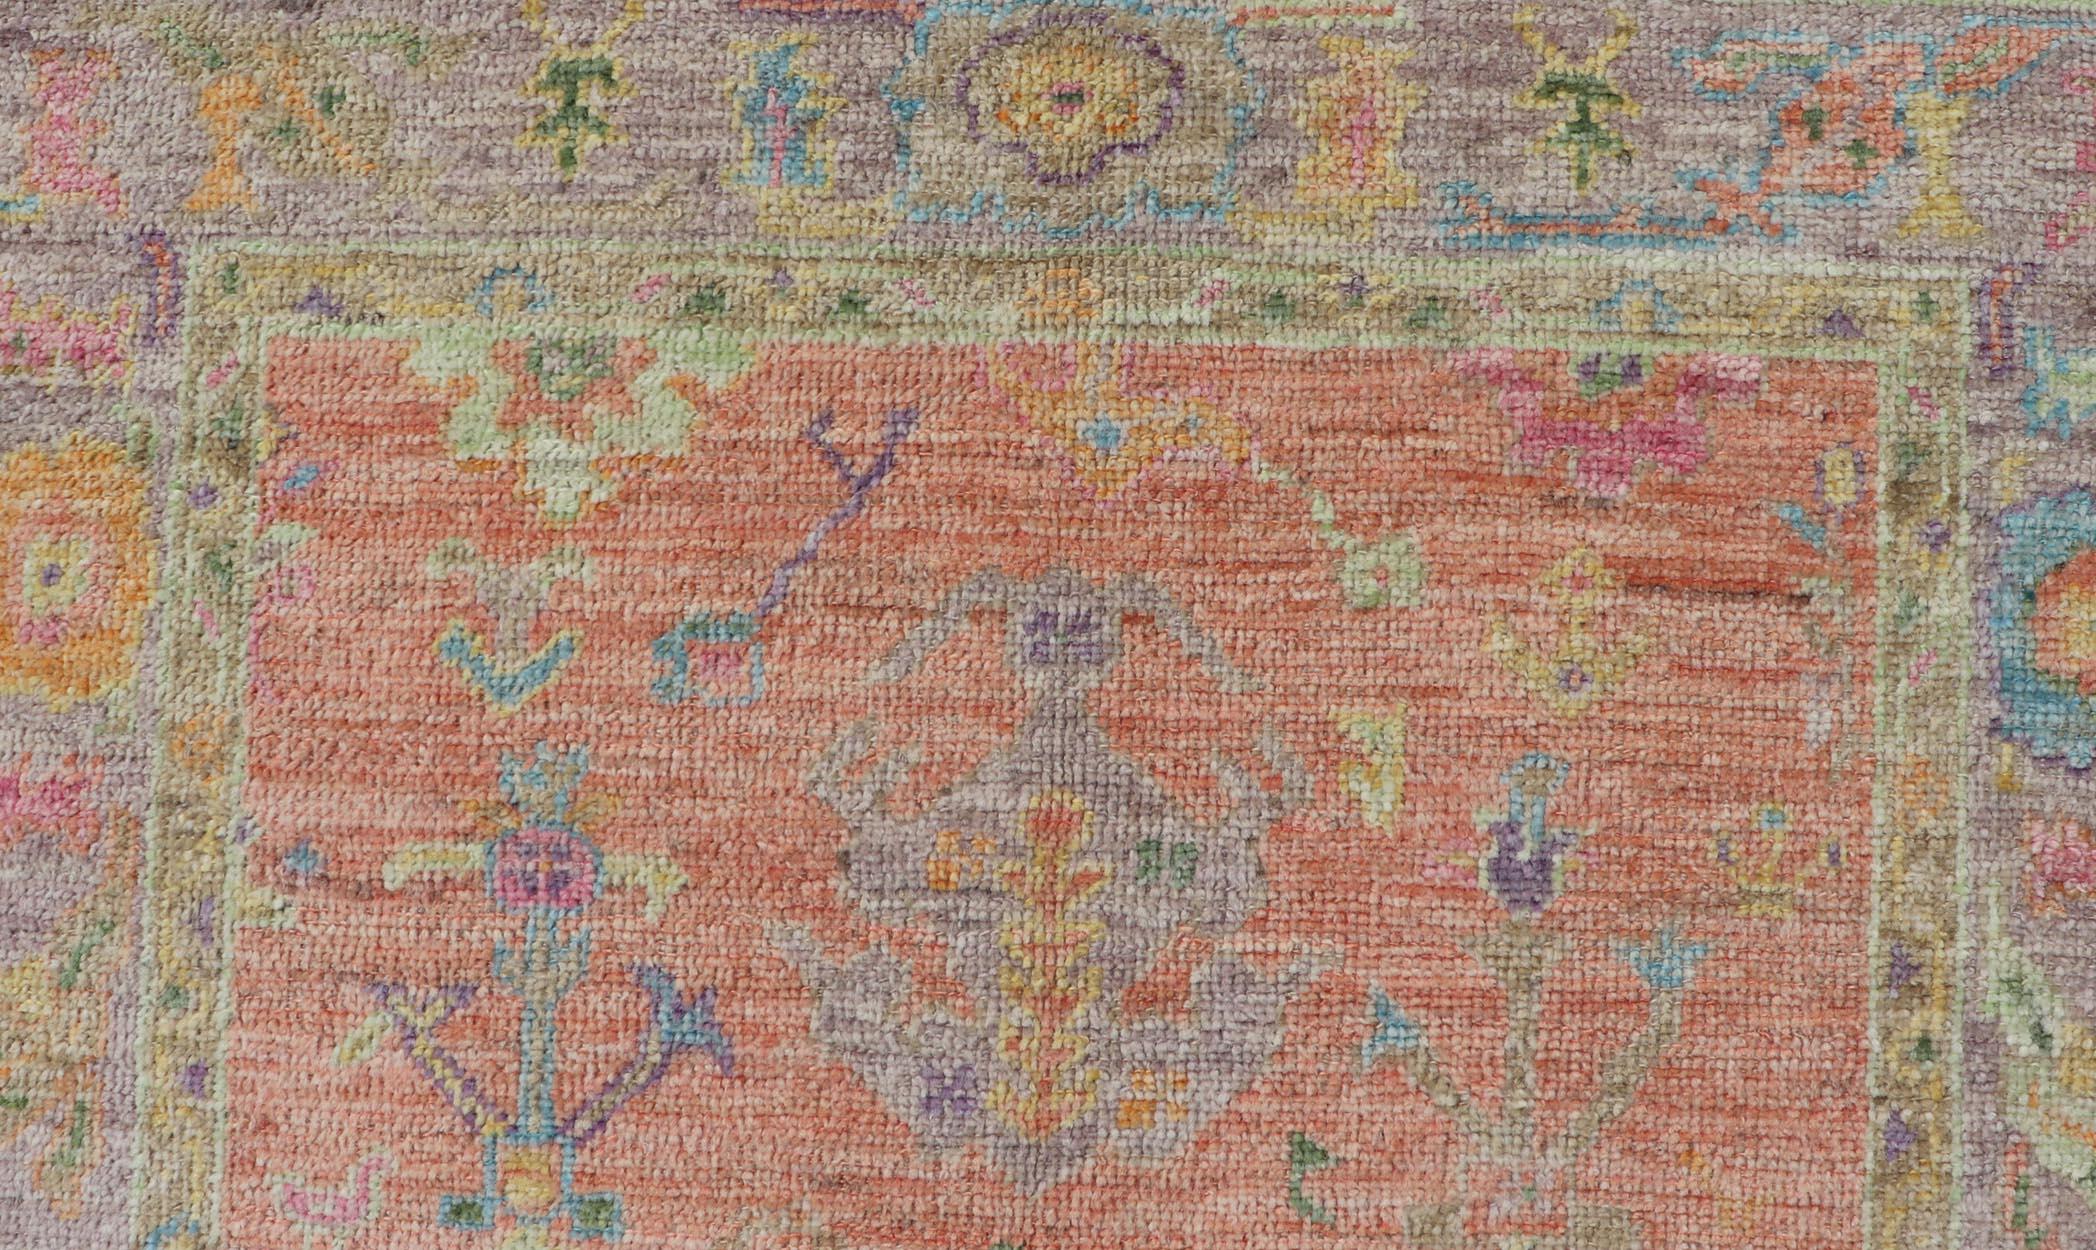 This very unique piece has a wide array of bright colors, starting with a faded orange background and a light lilac border, showcasing fuchsia, electric blue, violet, orange and seafoam green. The field design showcases the same colors in a tribal